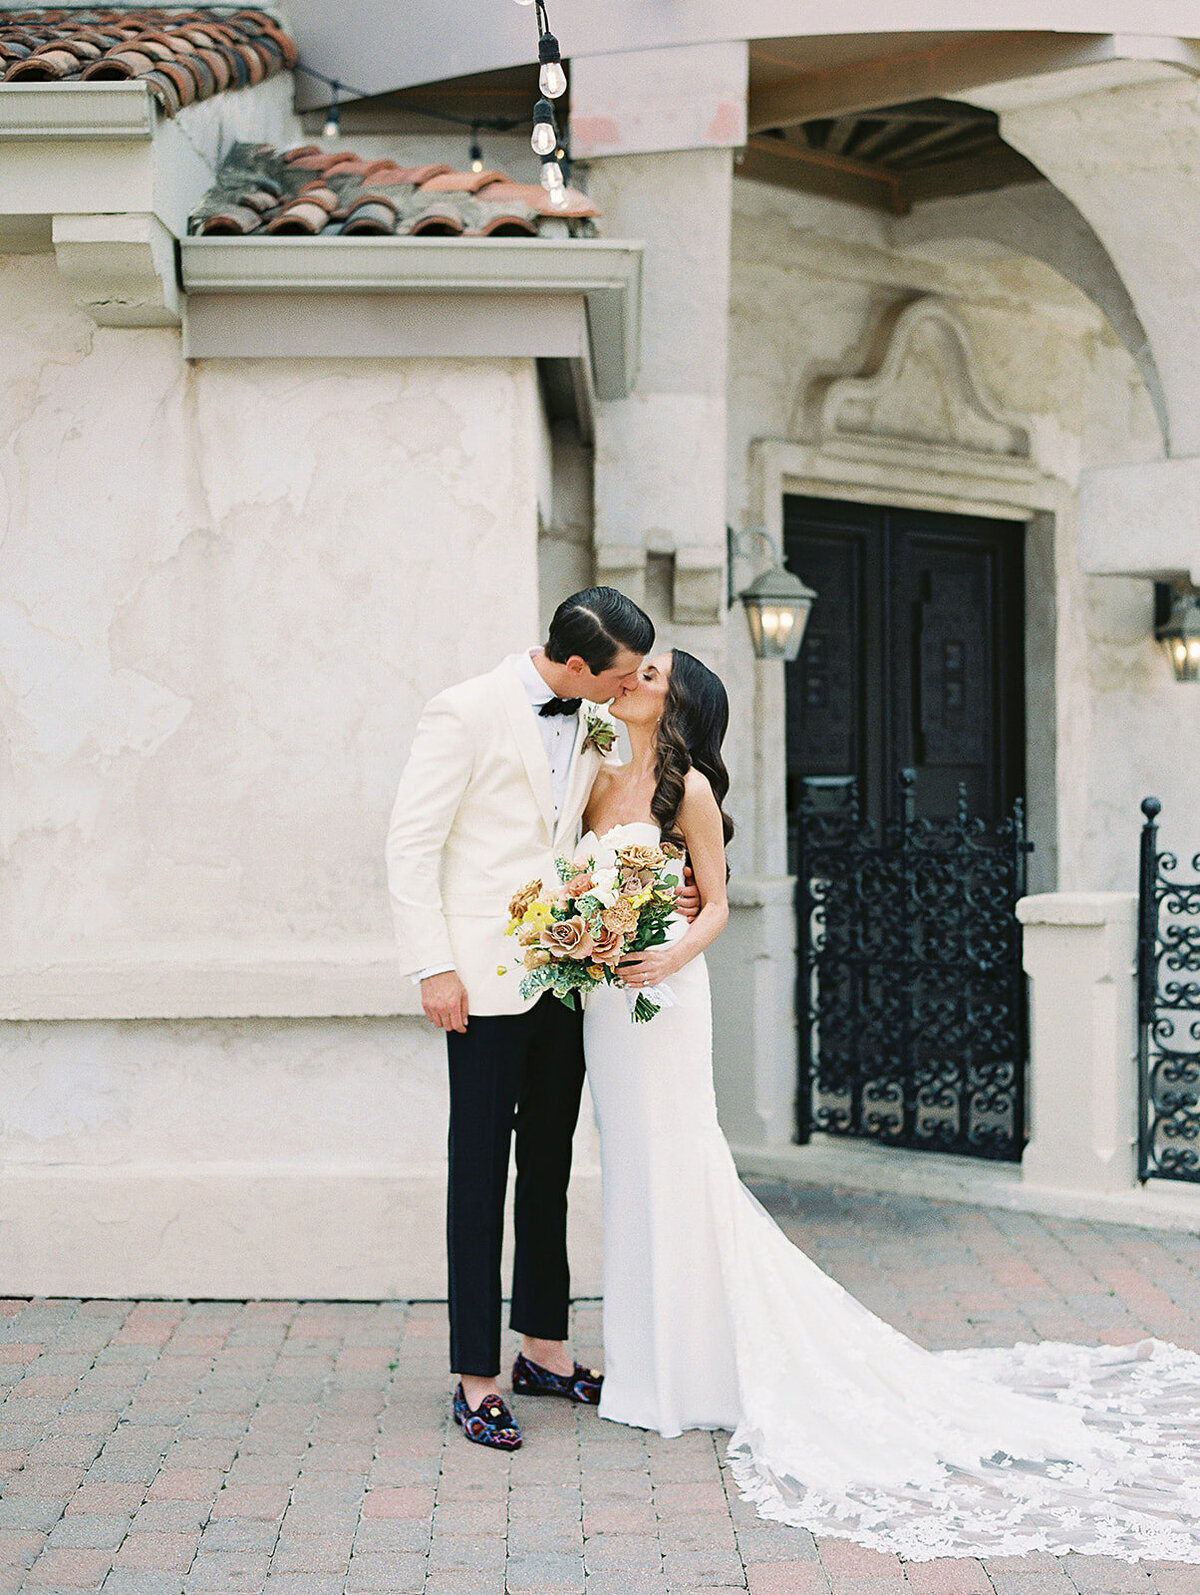 The bride and groom kiss for a classic photo at Villa Antonia